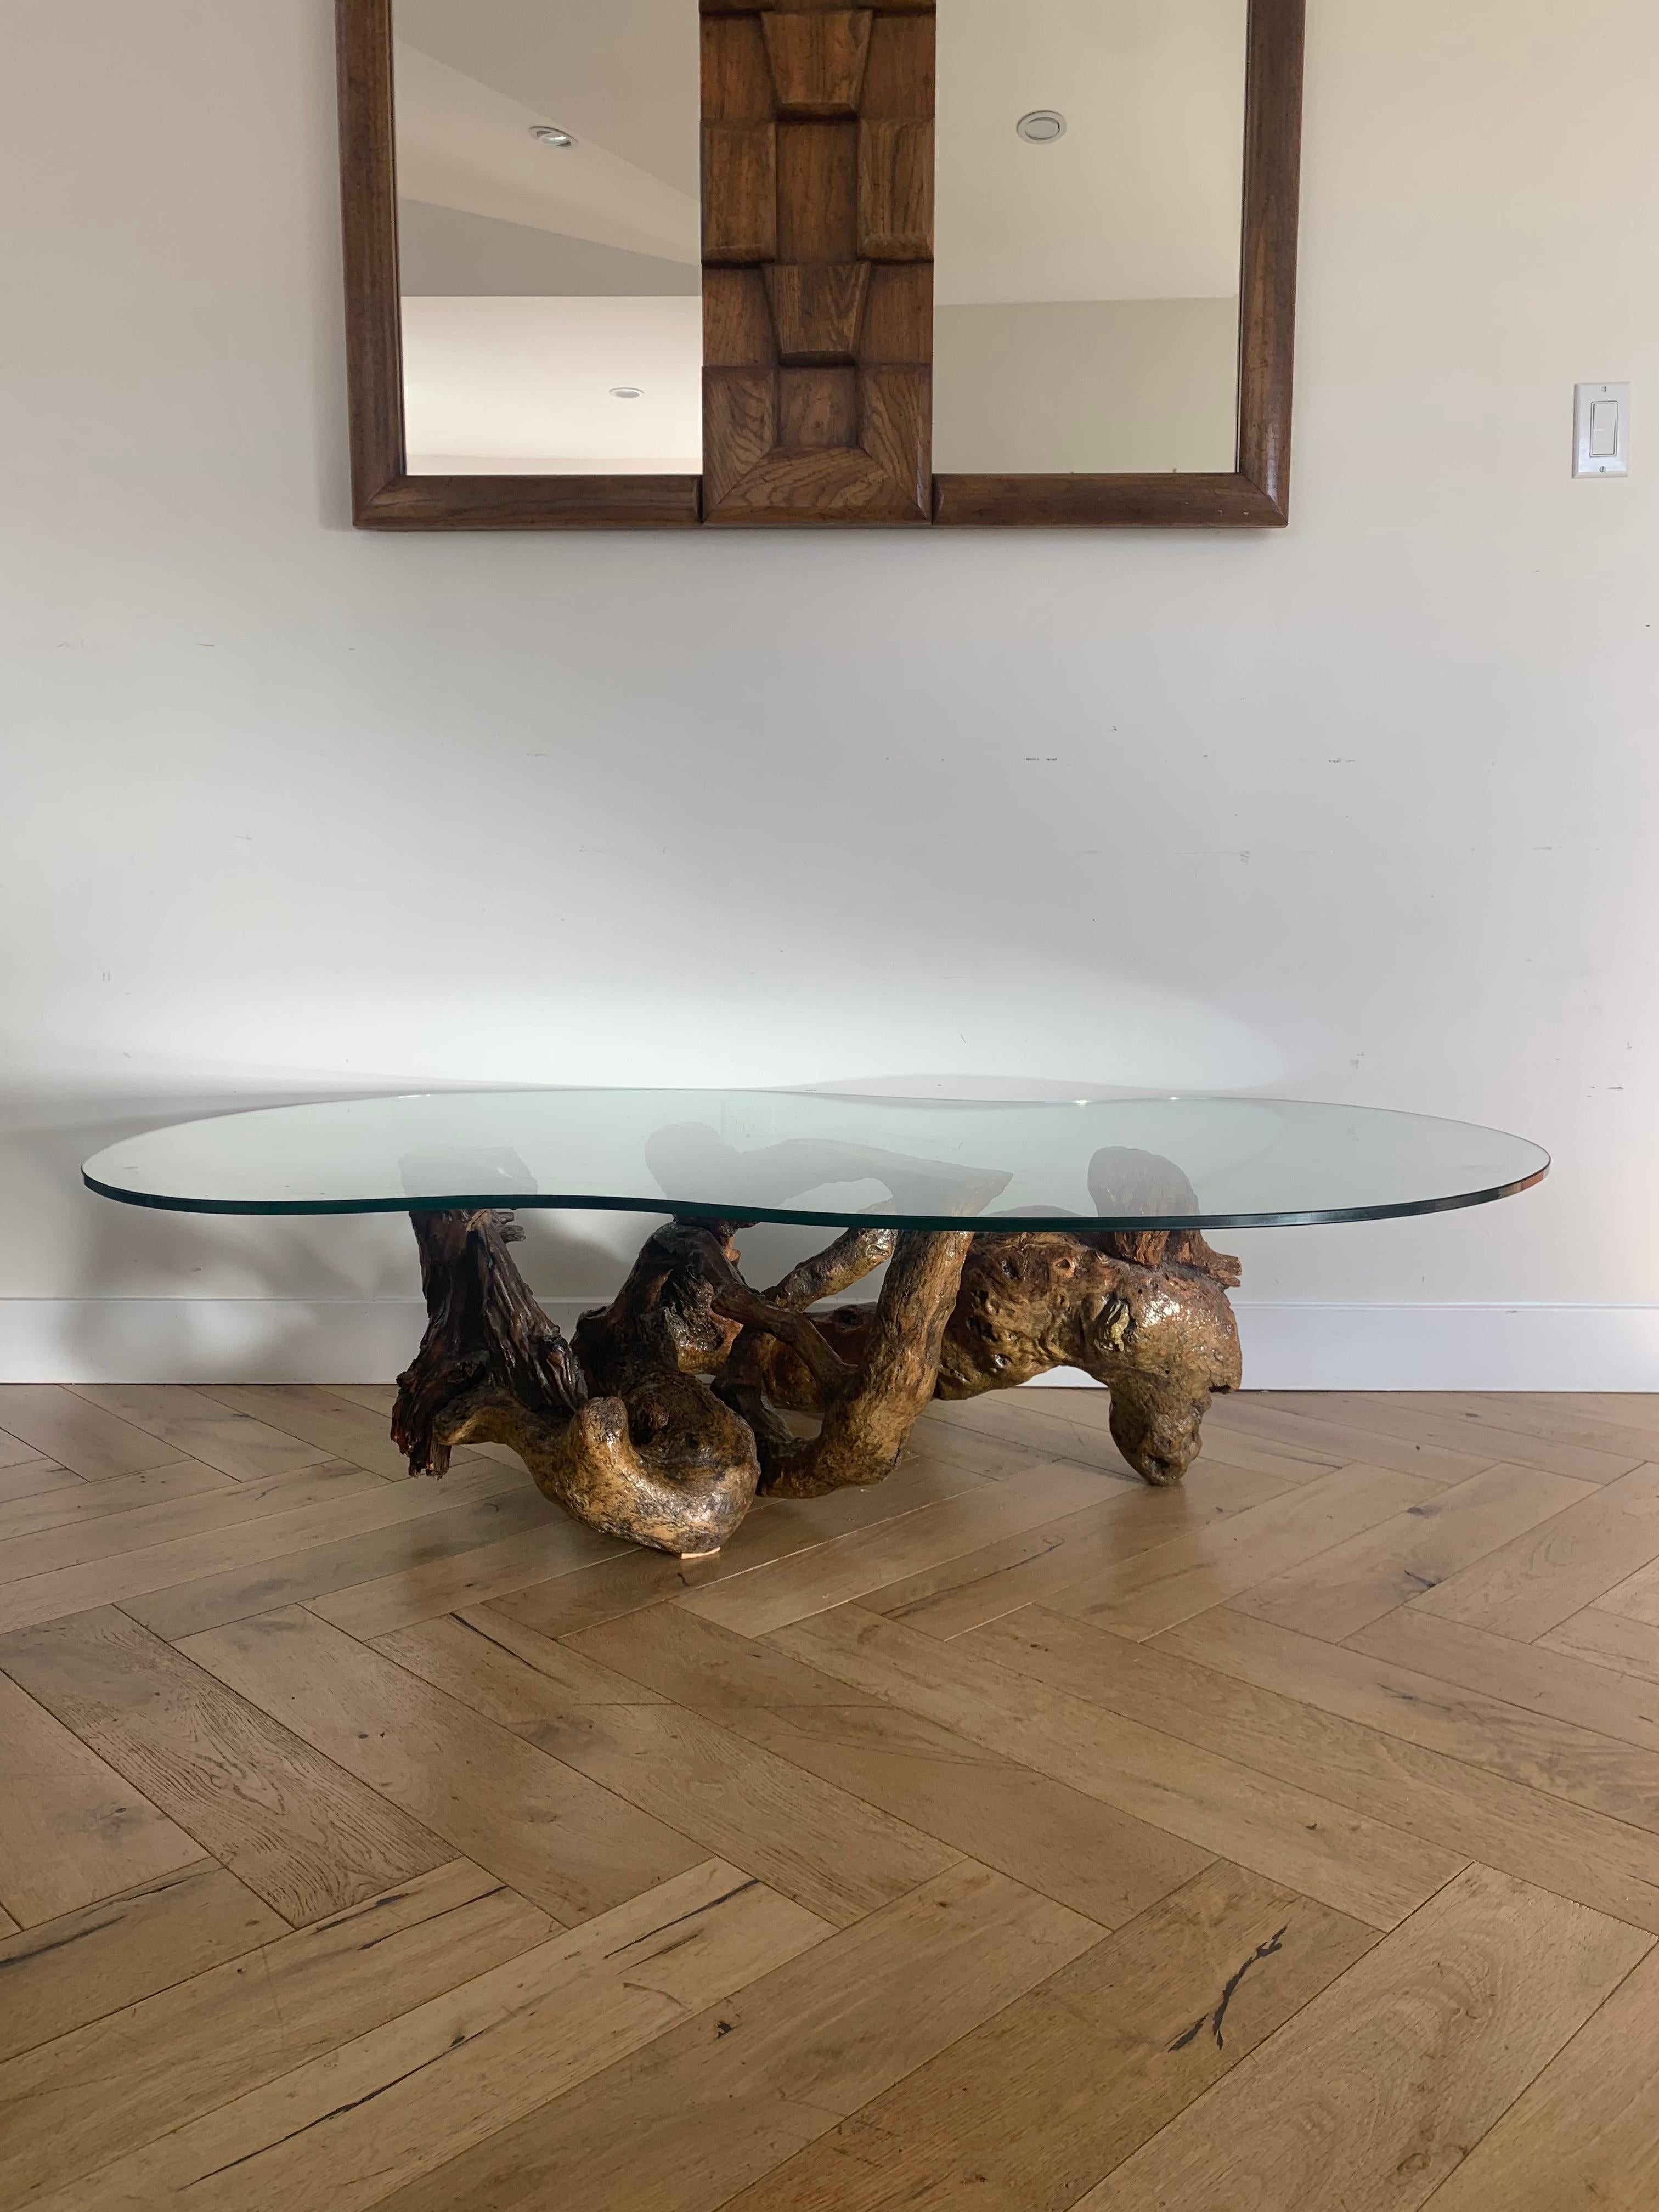 Mid century modern / organic modern raw root wood coffee table with biomorphic glass top, late 1960s or early 1970s. Very unique root wood for the base. There are a couple minor scratches on the glass but overall impeccable condition. Pick up in LA